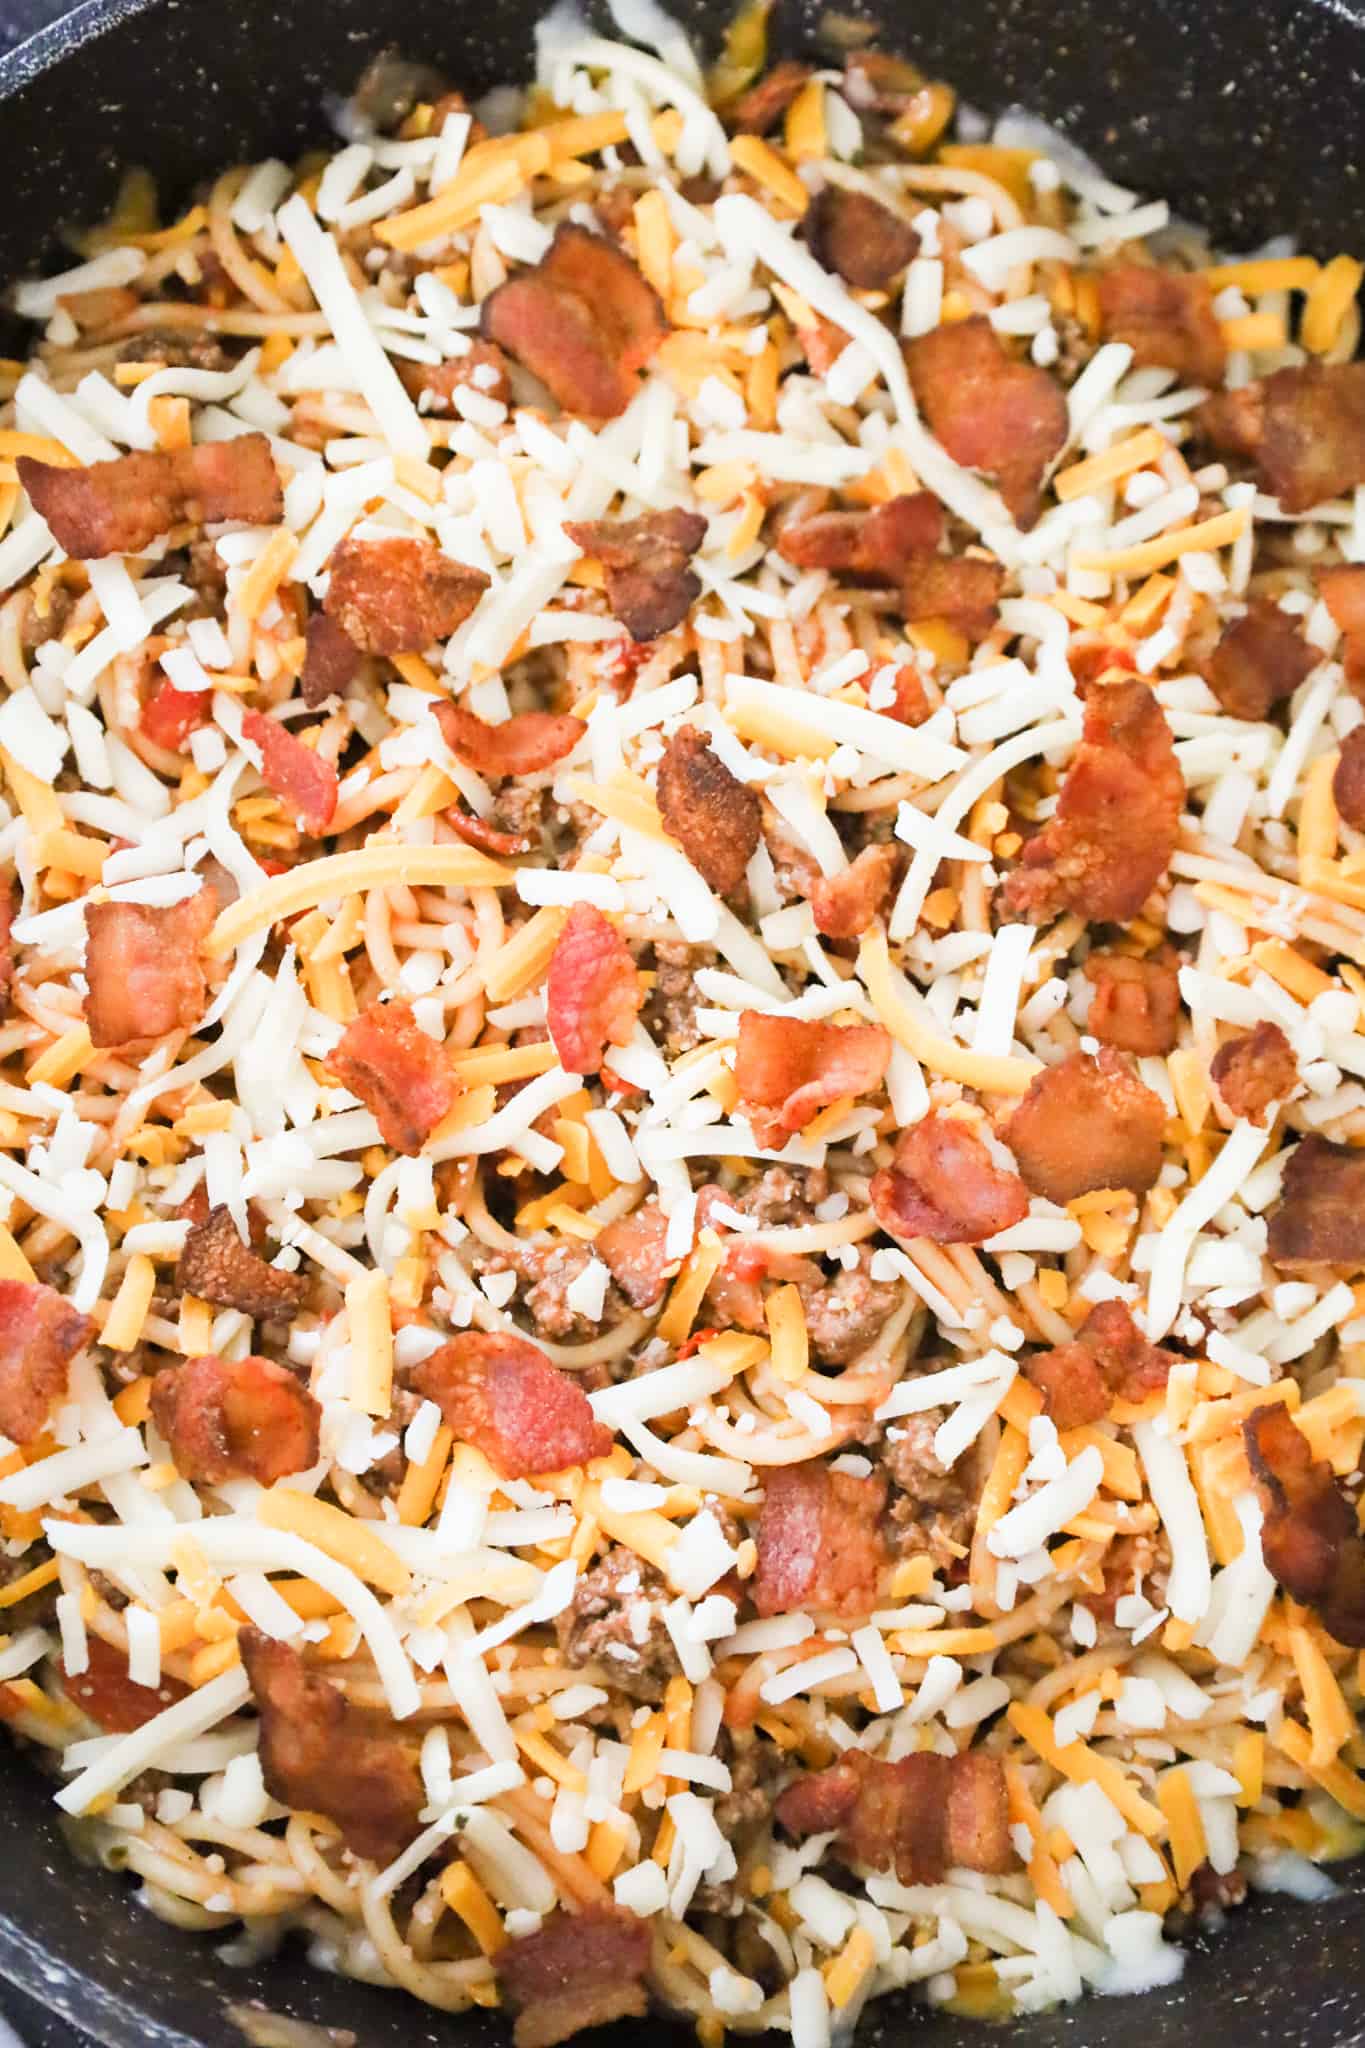 shredded cheese and chopped bacon on top of spaghetti in a skillet